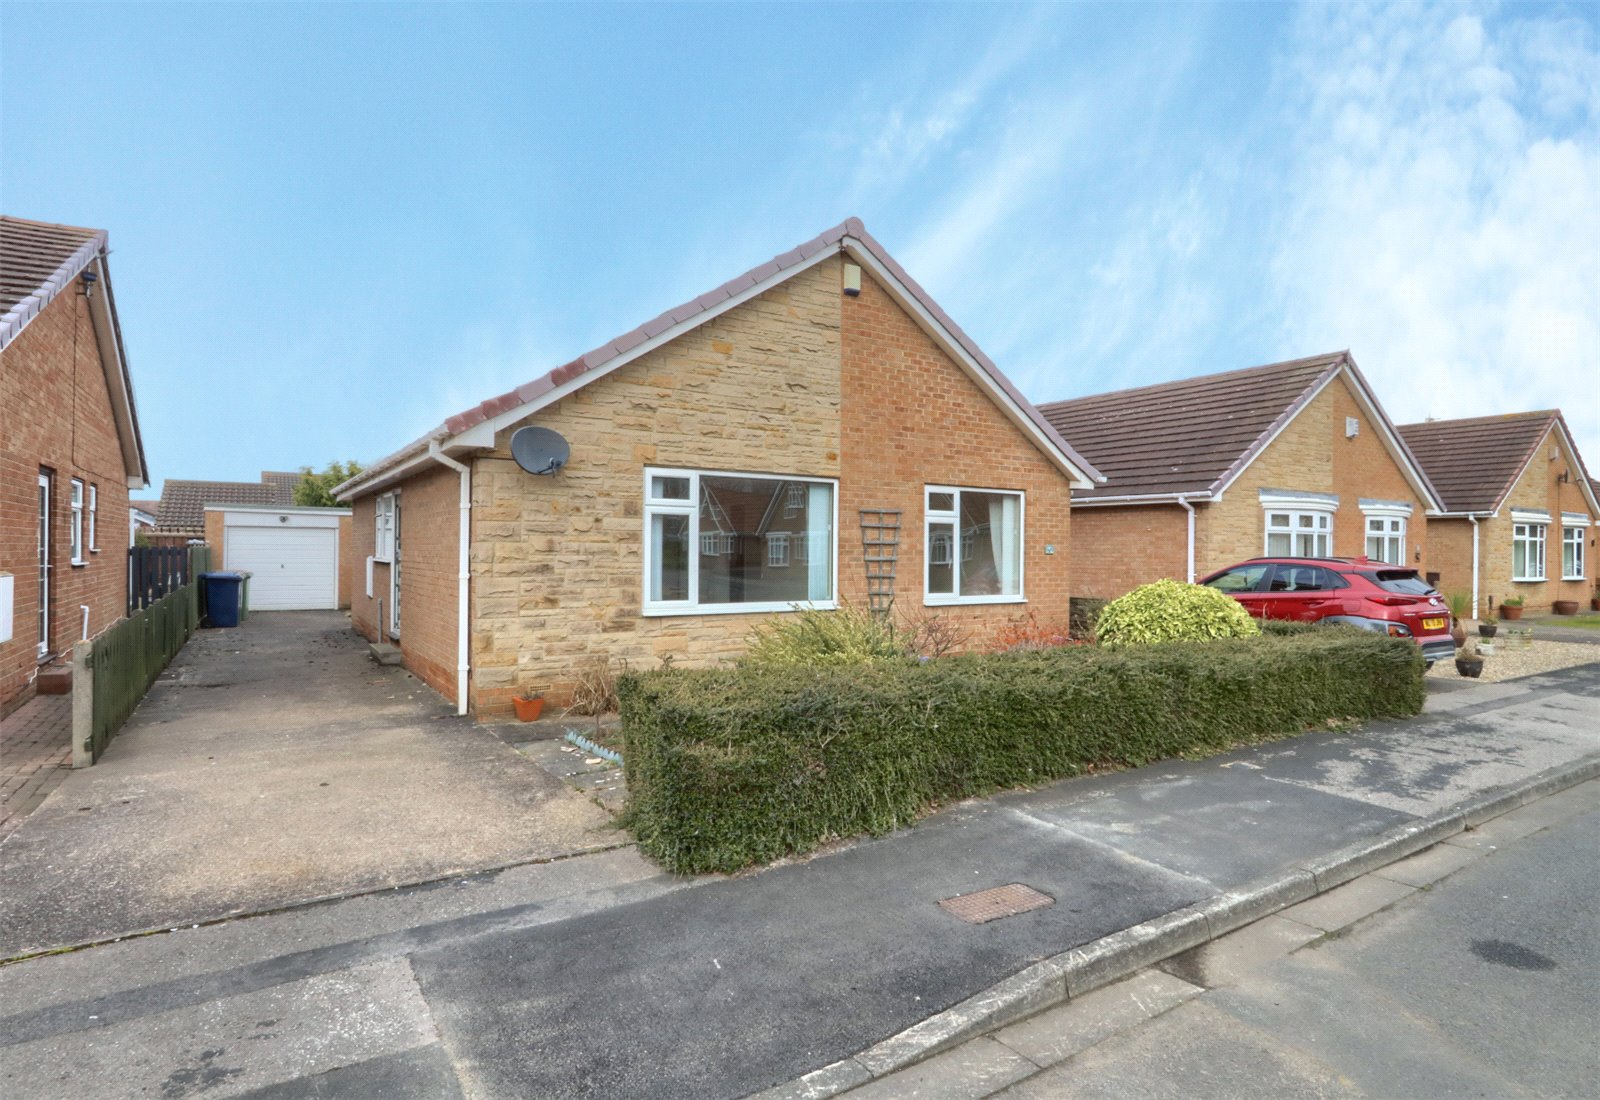 3 bed bungalow for sale in East Lodge Gardens, Kirkleatham 1